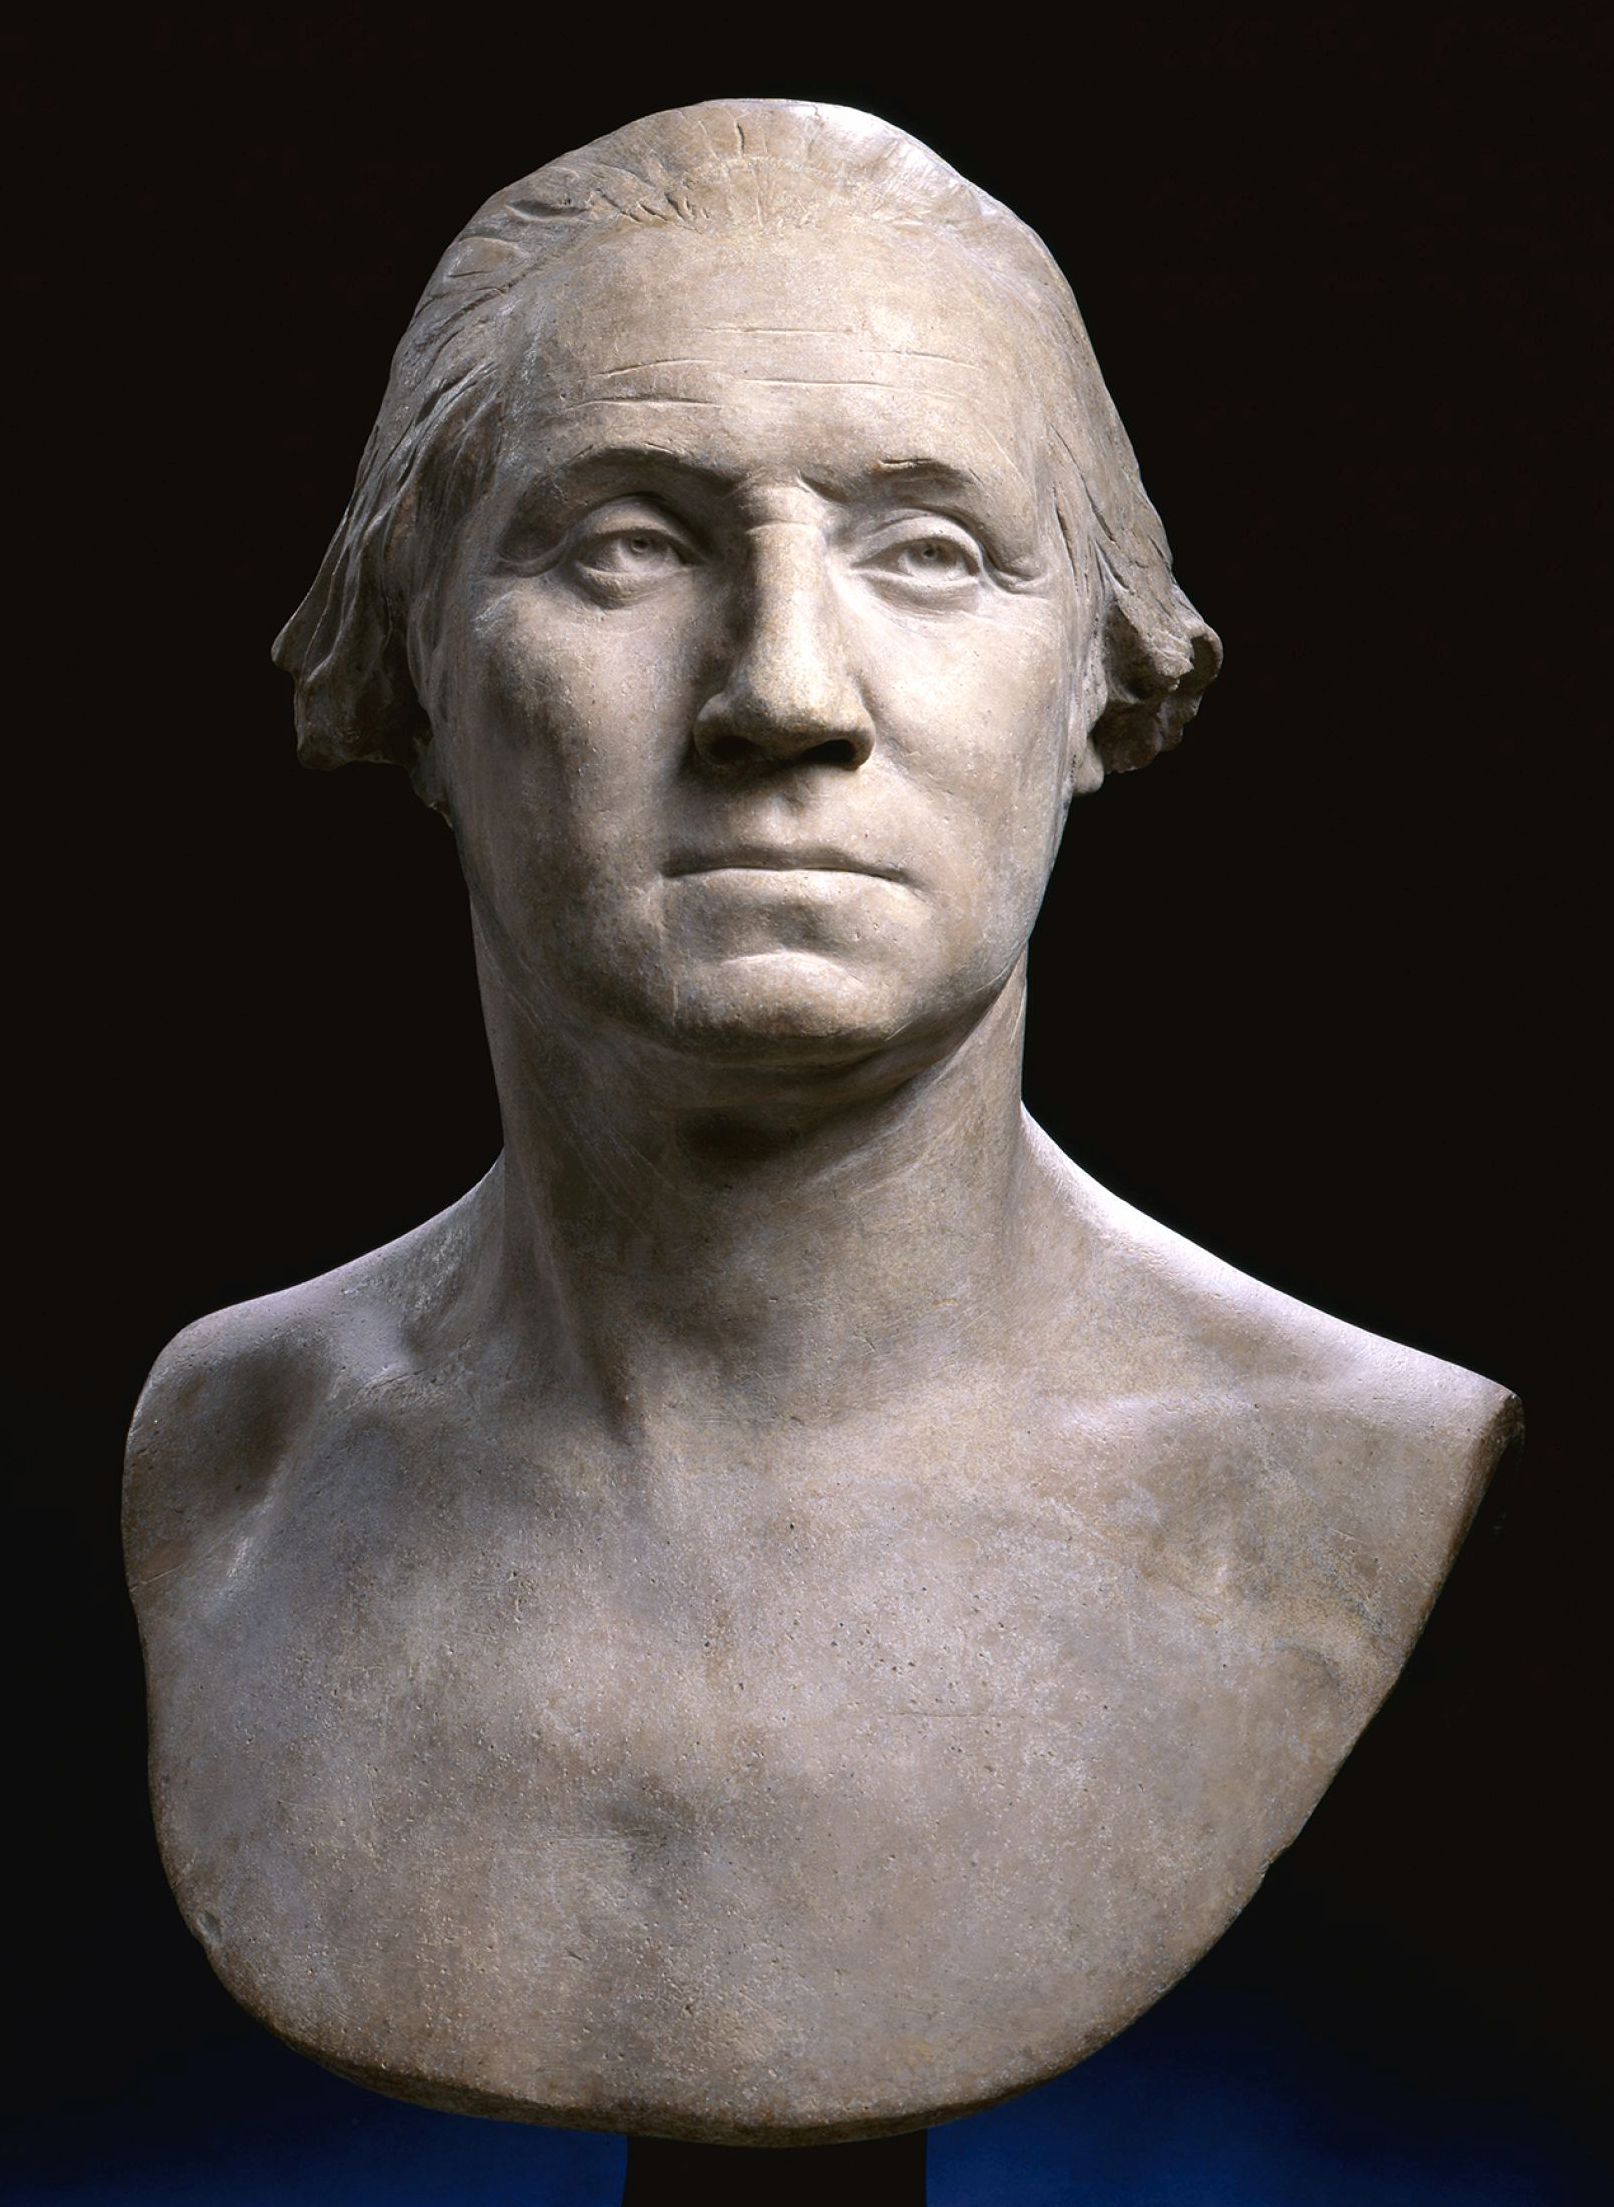 The face of the Father of his Country was captured in plaster in a life mask by the French sculptor Jean Antoine Houdon at Mount Vernon in 1785, one year after Washington resigned his commission as Commander in Chief..